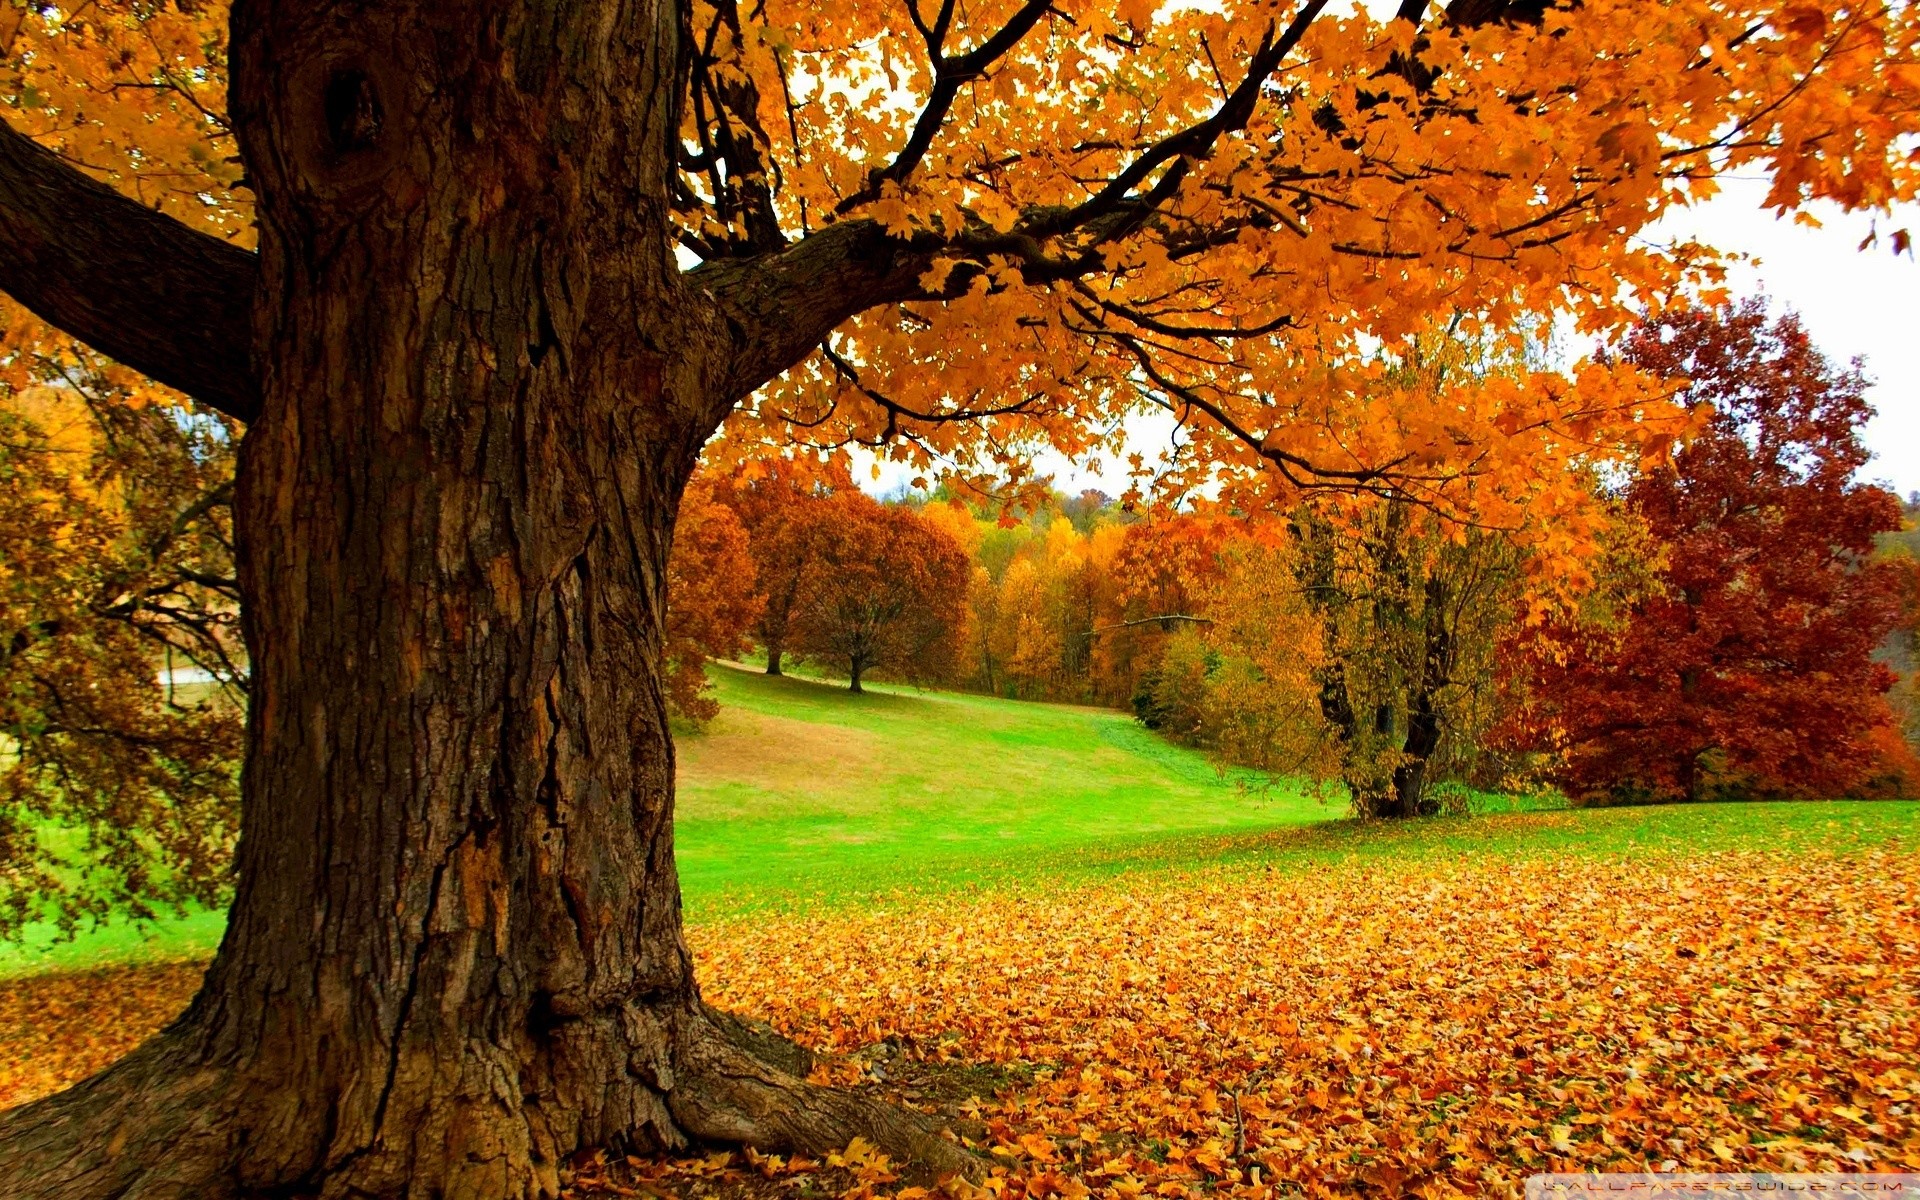 1920x1200 Spectacular autumn scene - HD wallpaper download. Wallpapers, pictures .